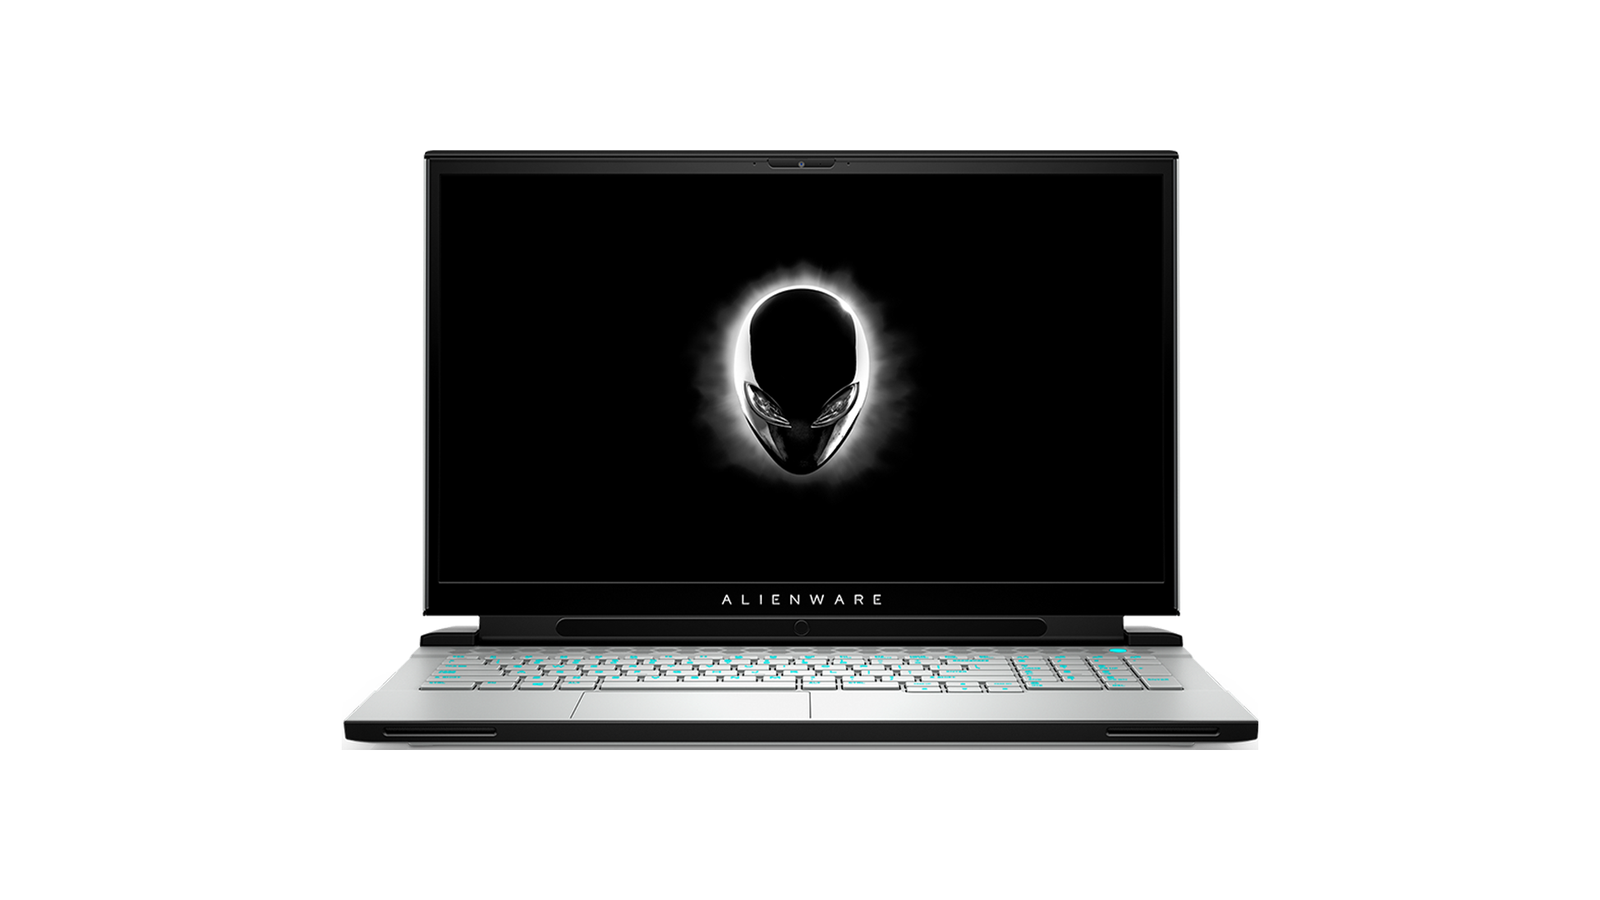 Alienware m17 R4 (2021) - Dell laptop that is ideal for AAA gaming